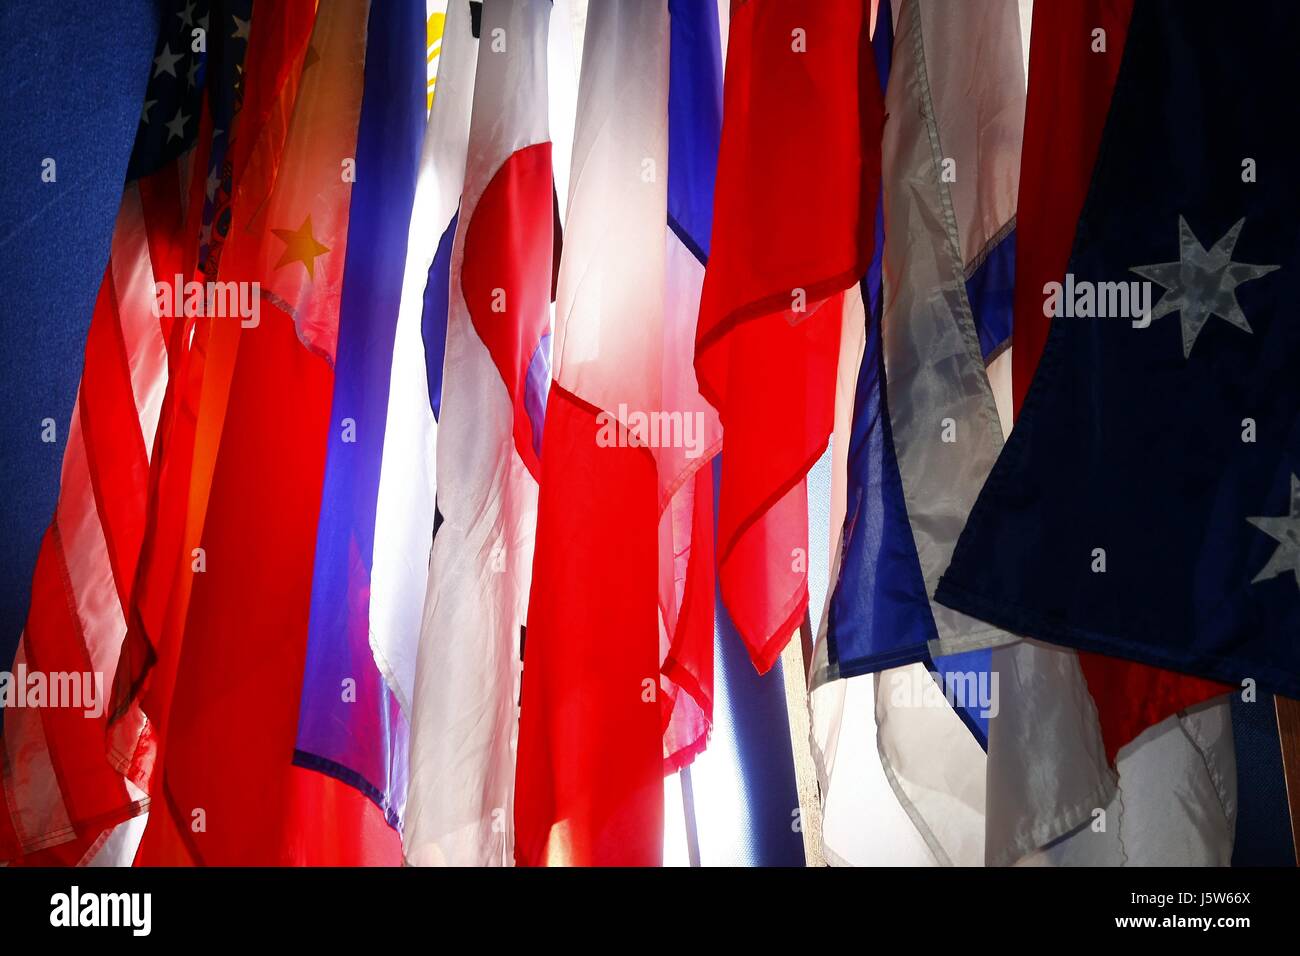 Photo of assorted flags of different countries Stock Photo